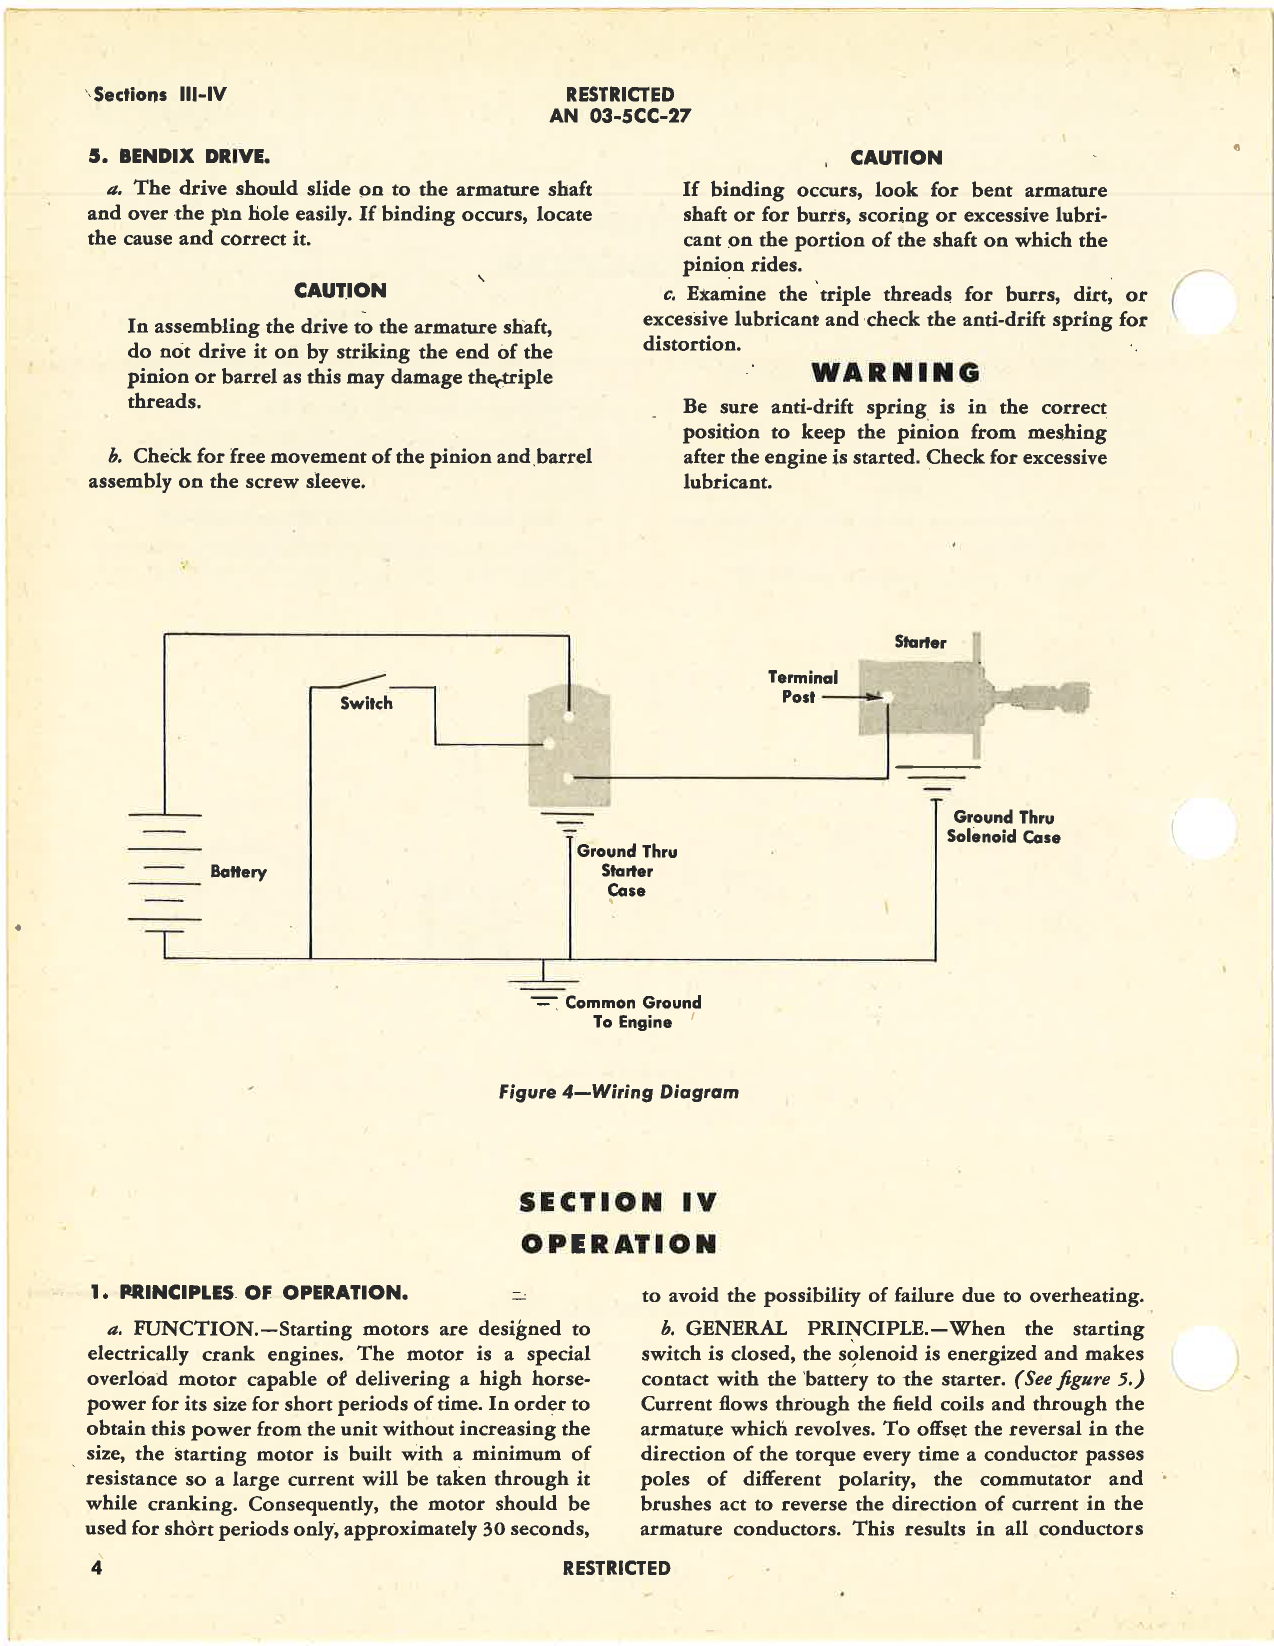 Sample page 8 from AirCorps Library document: Handbook of Instructions with Parts Catalog for Model 1109651 Starting Motor